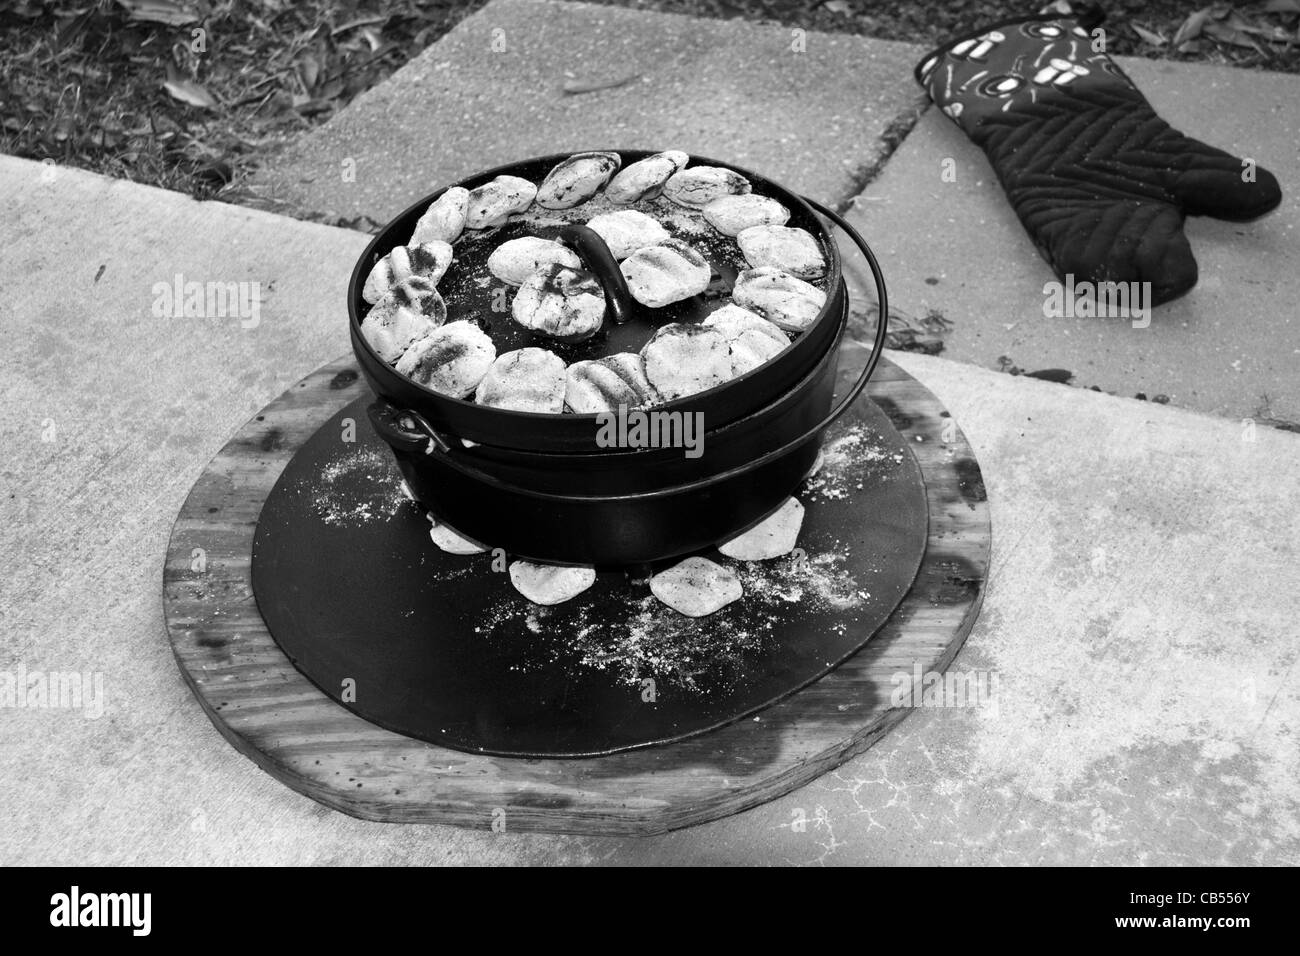 Dutch Oven outdoor cooking using cast iron pots with metal base support and heavy duty cooking mitt. Stock Photo